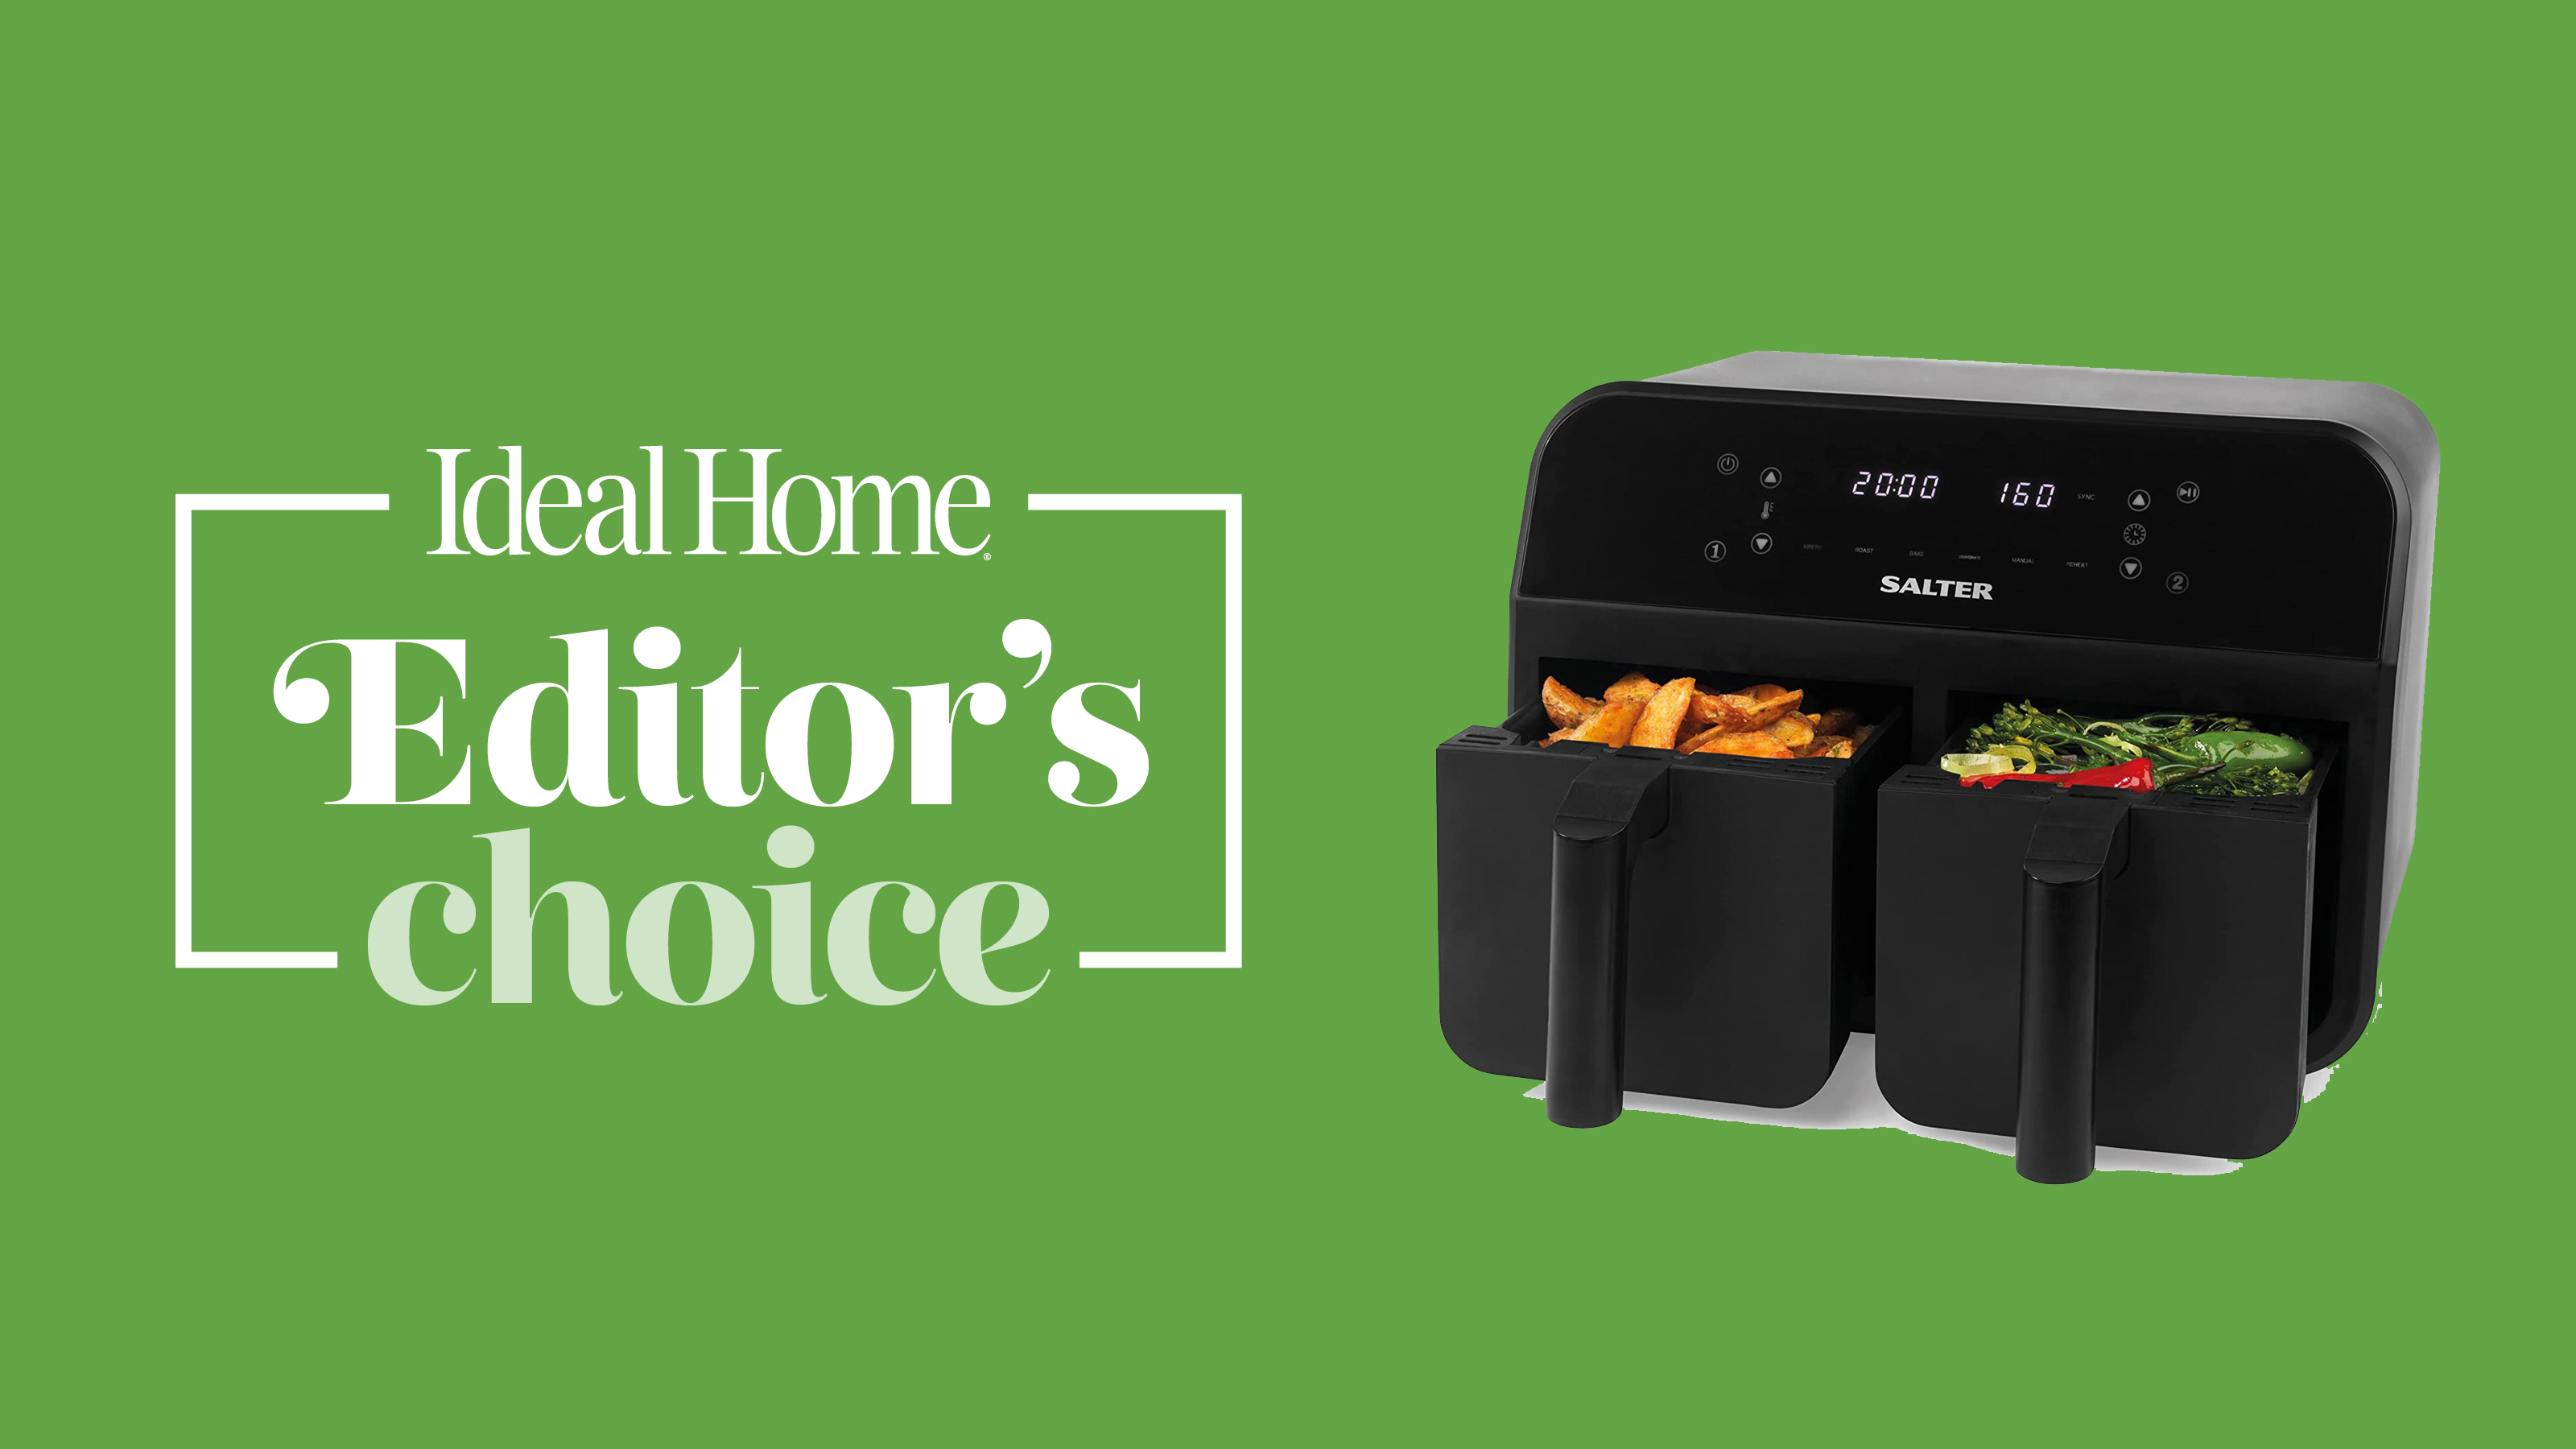 Image of Salter Dual zone air fryer on green ideal home graphic background